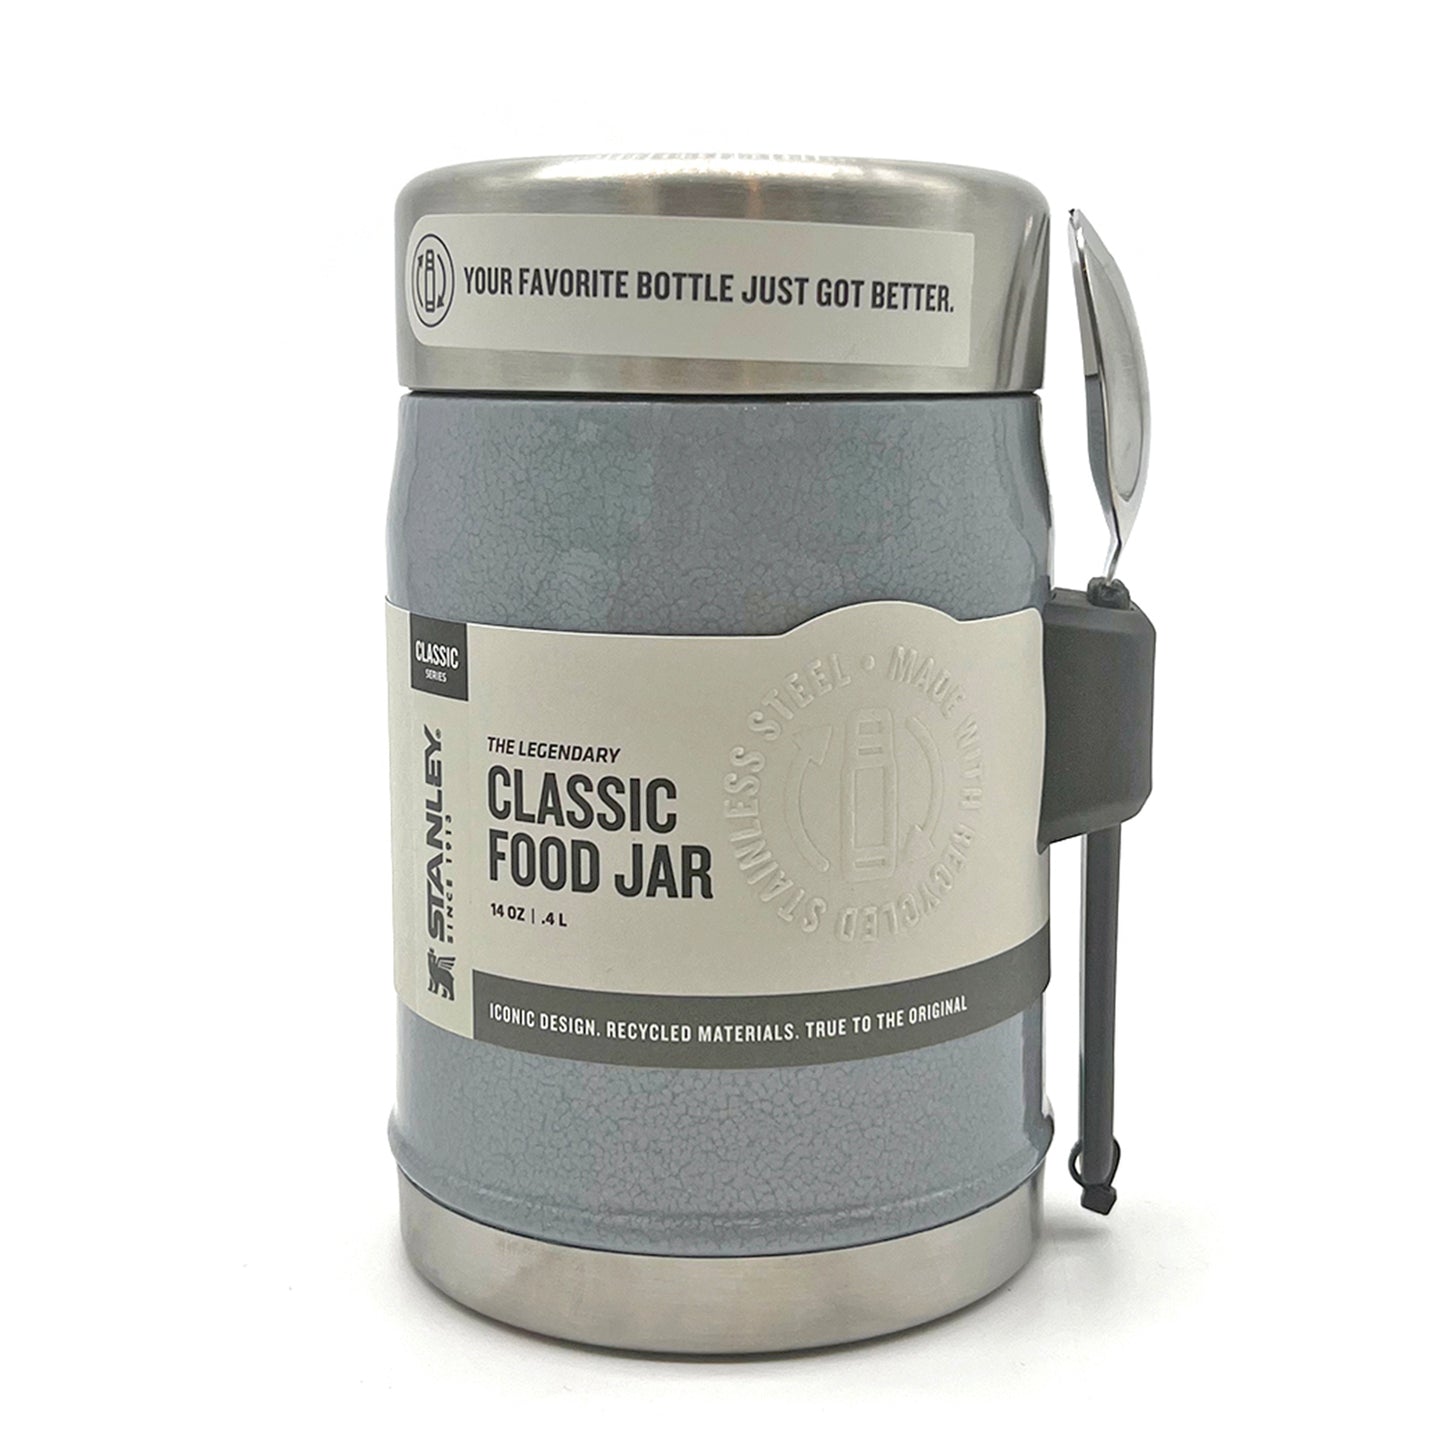 STANLEY Classic Food Jar: Iconic Design, Recycled Materials